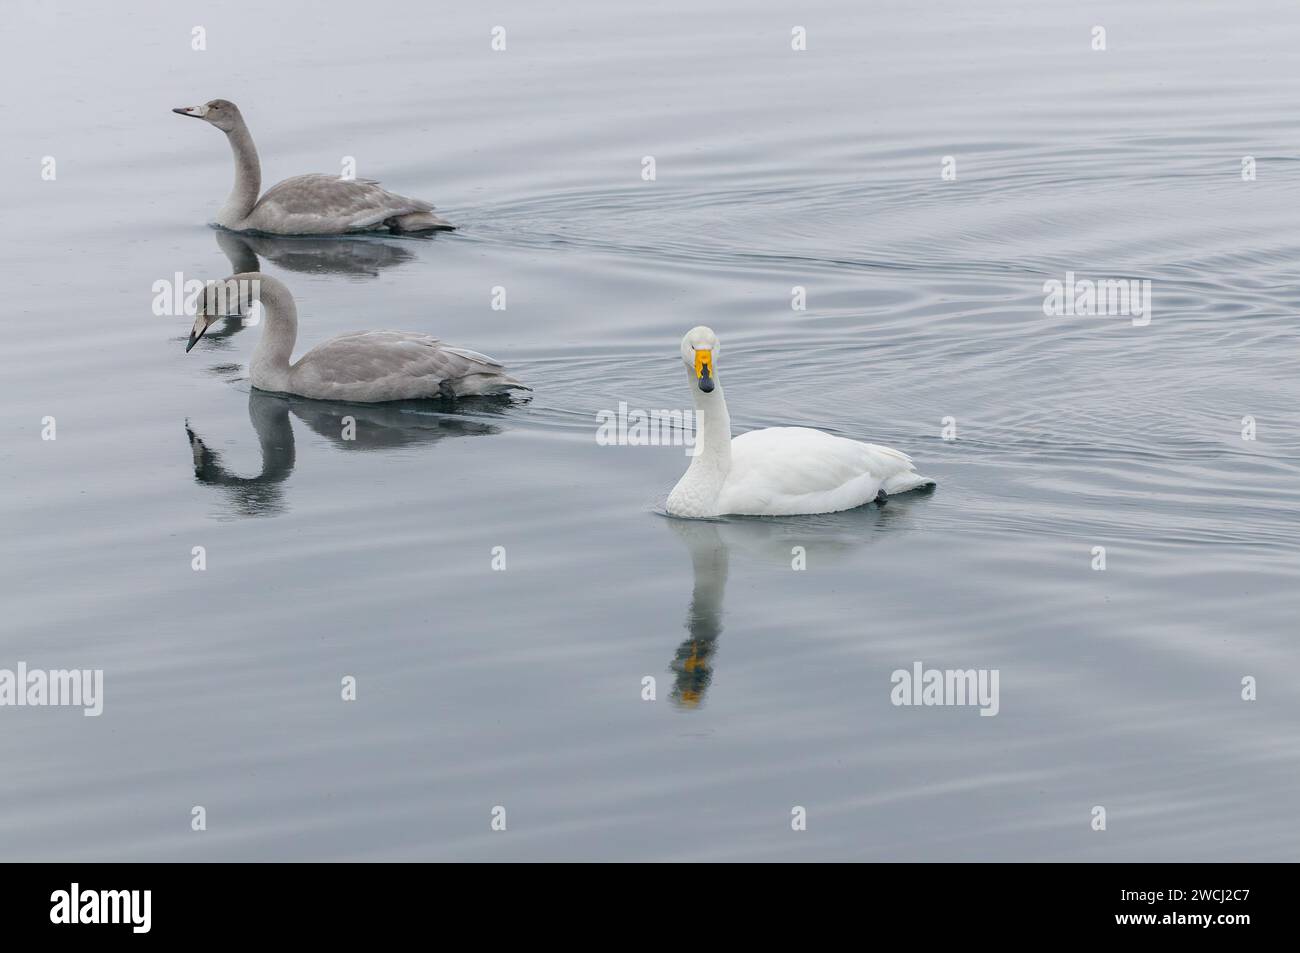 A trio of graceful swans, one adult and two juveniles, swim placidly through the calm waters of a fog-covered lake as morning breaks. Stock Photo